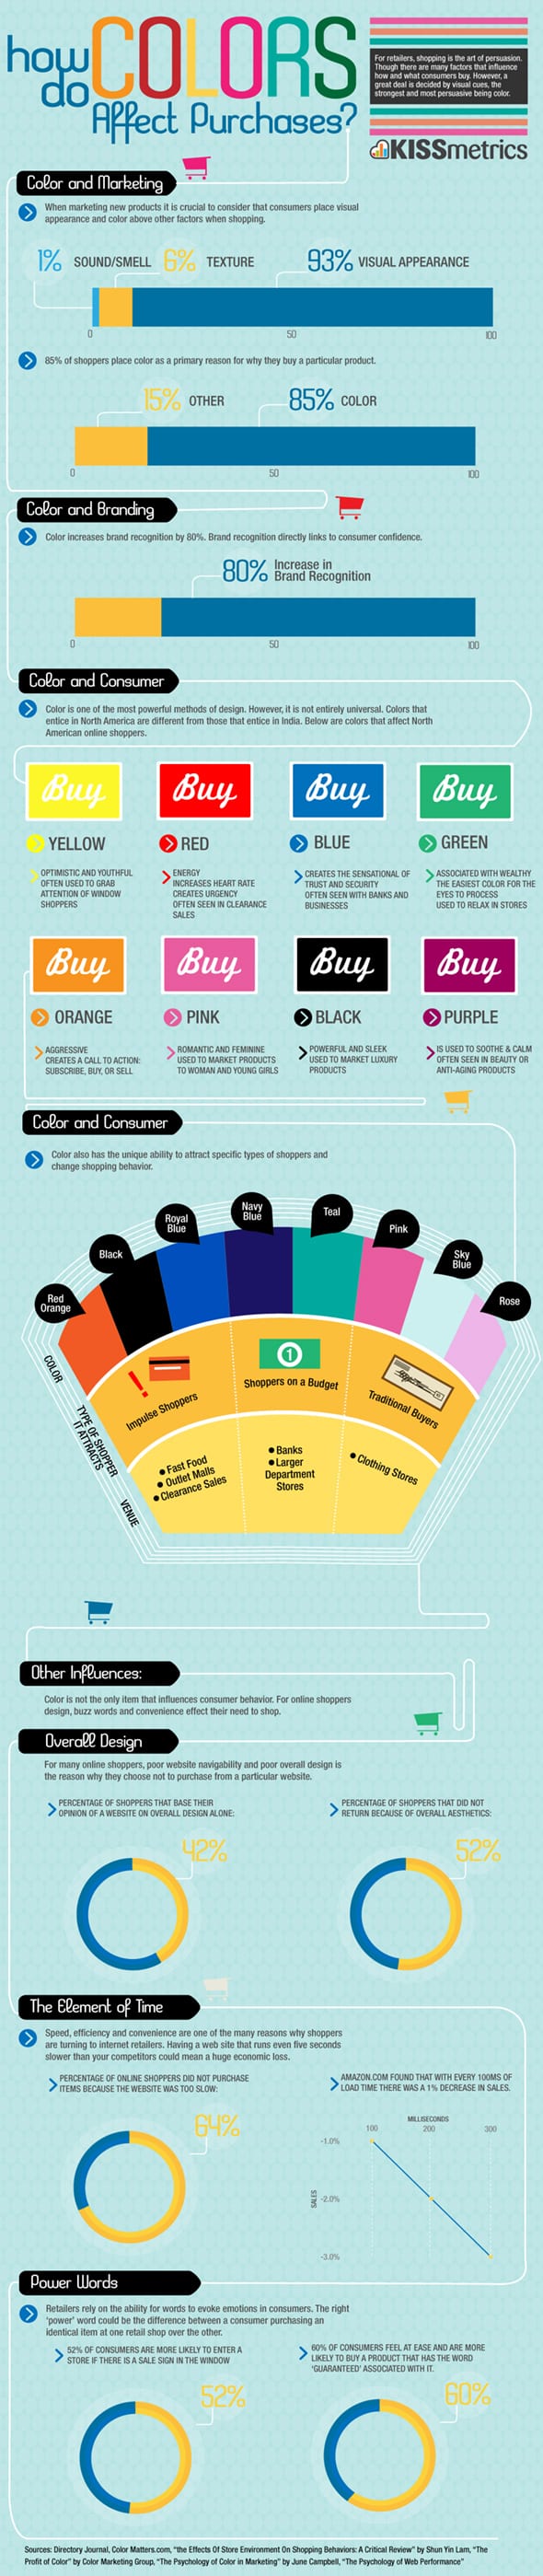 infographic_ecommerce_color_affect_purchases